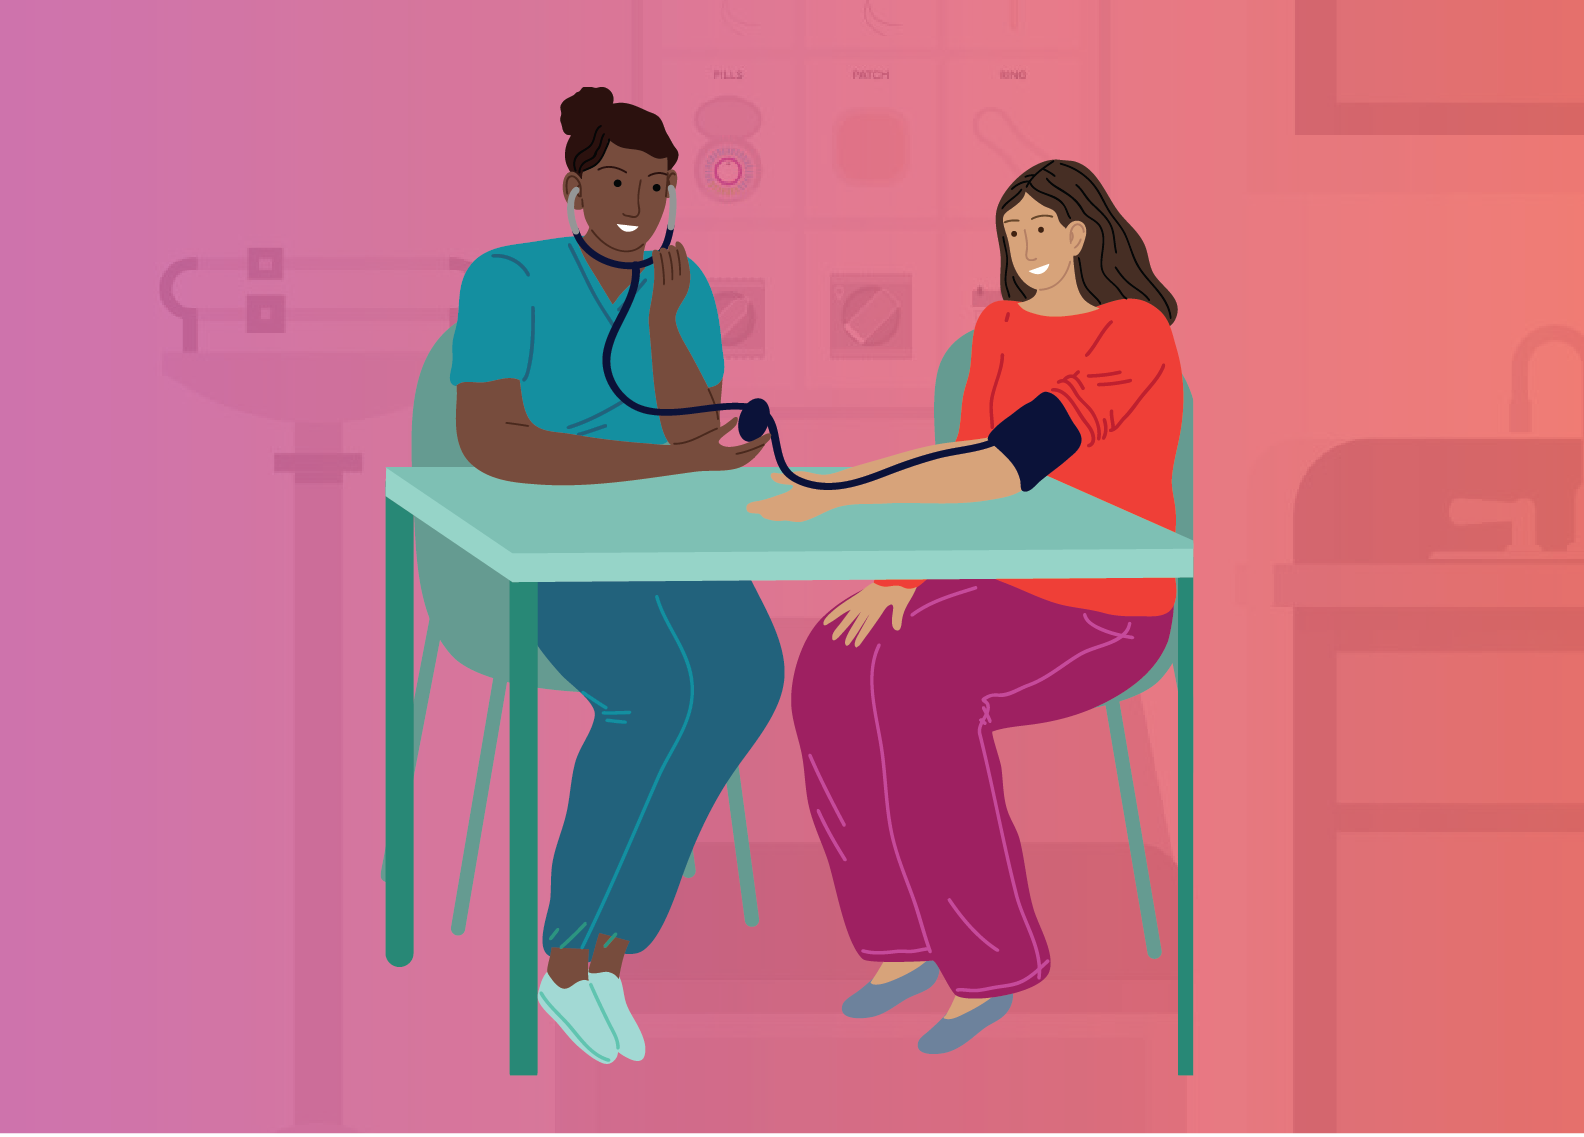 Illustration of a woman meeting with a doctor having her blood pressure taken